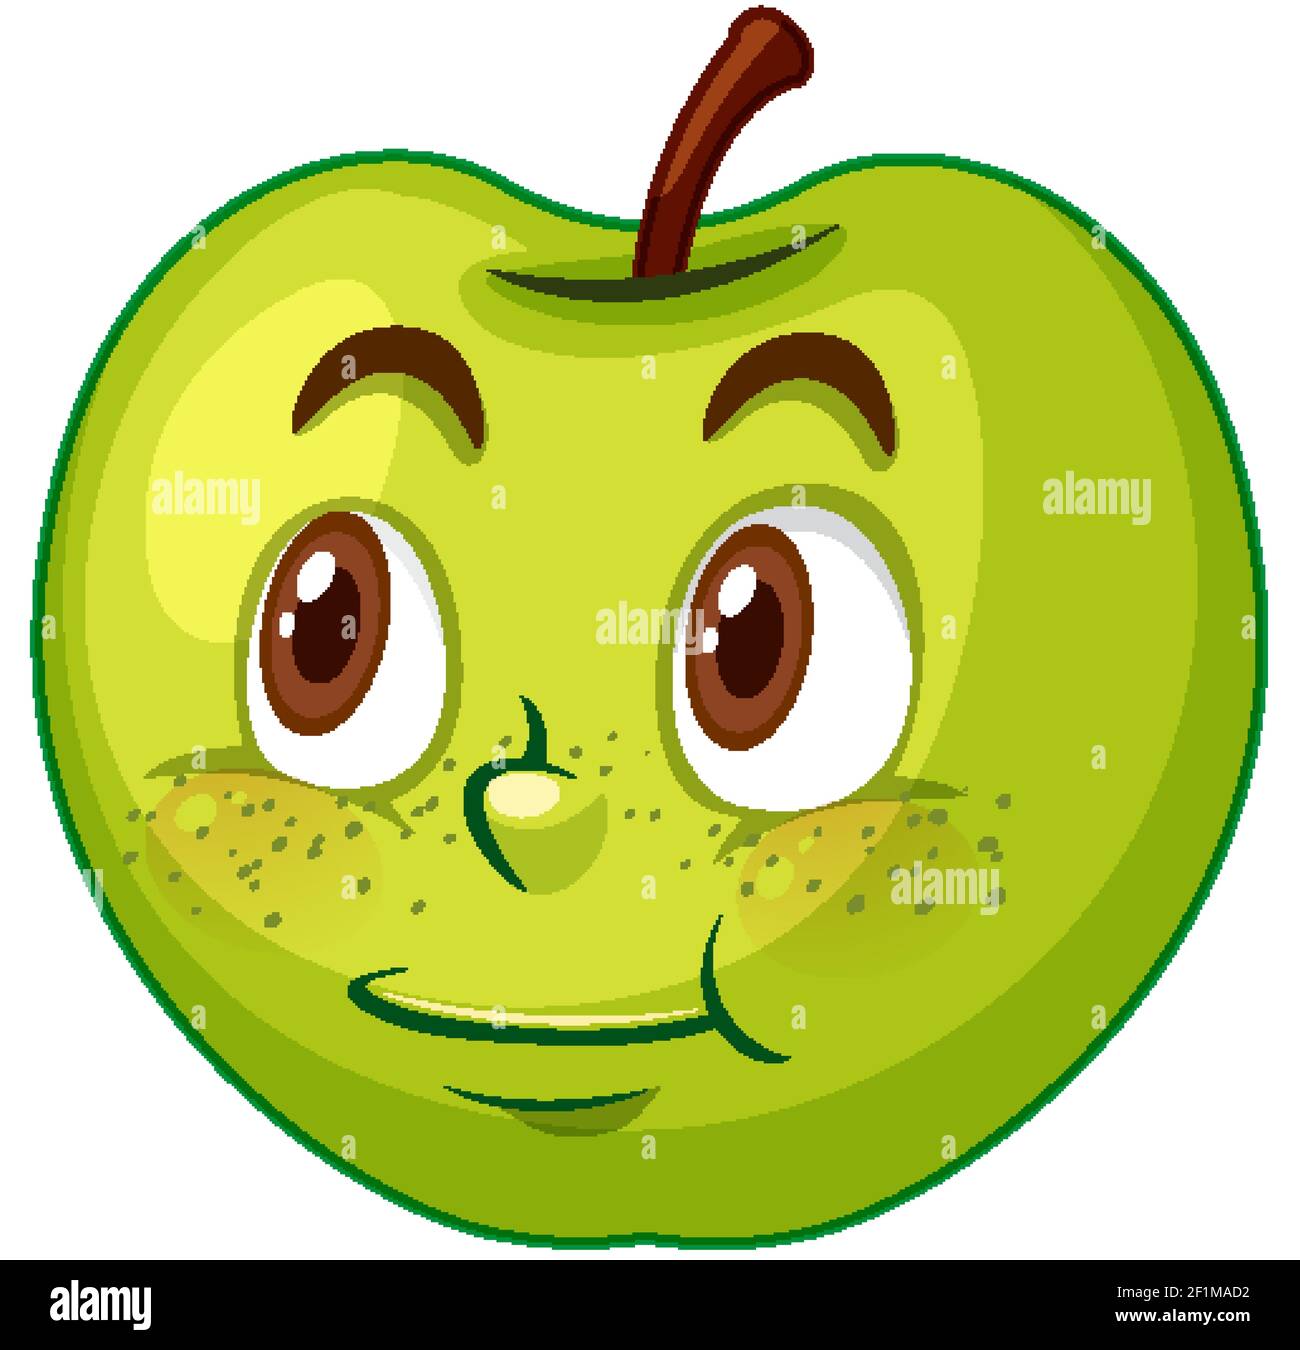 Emoji Apple Cut Out Stock Images Pictures Page 3 Alamy